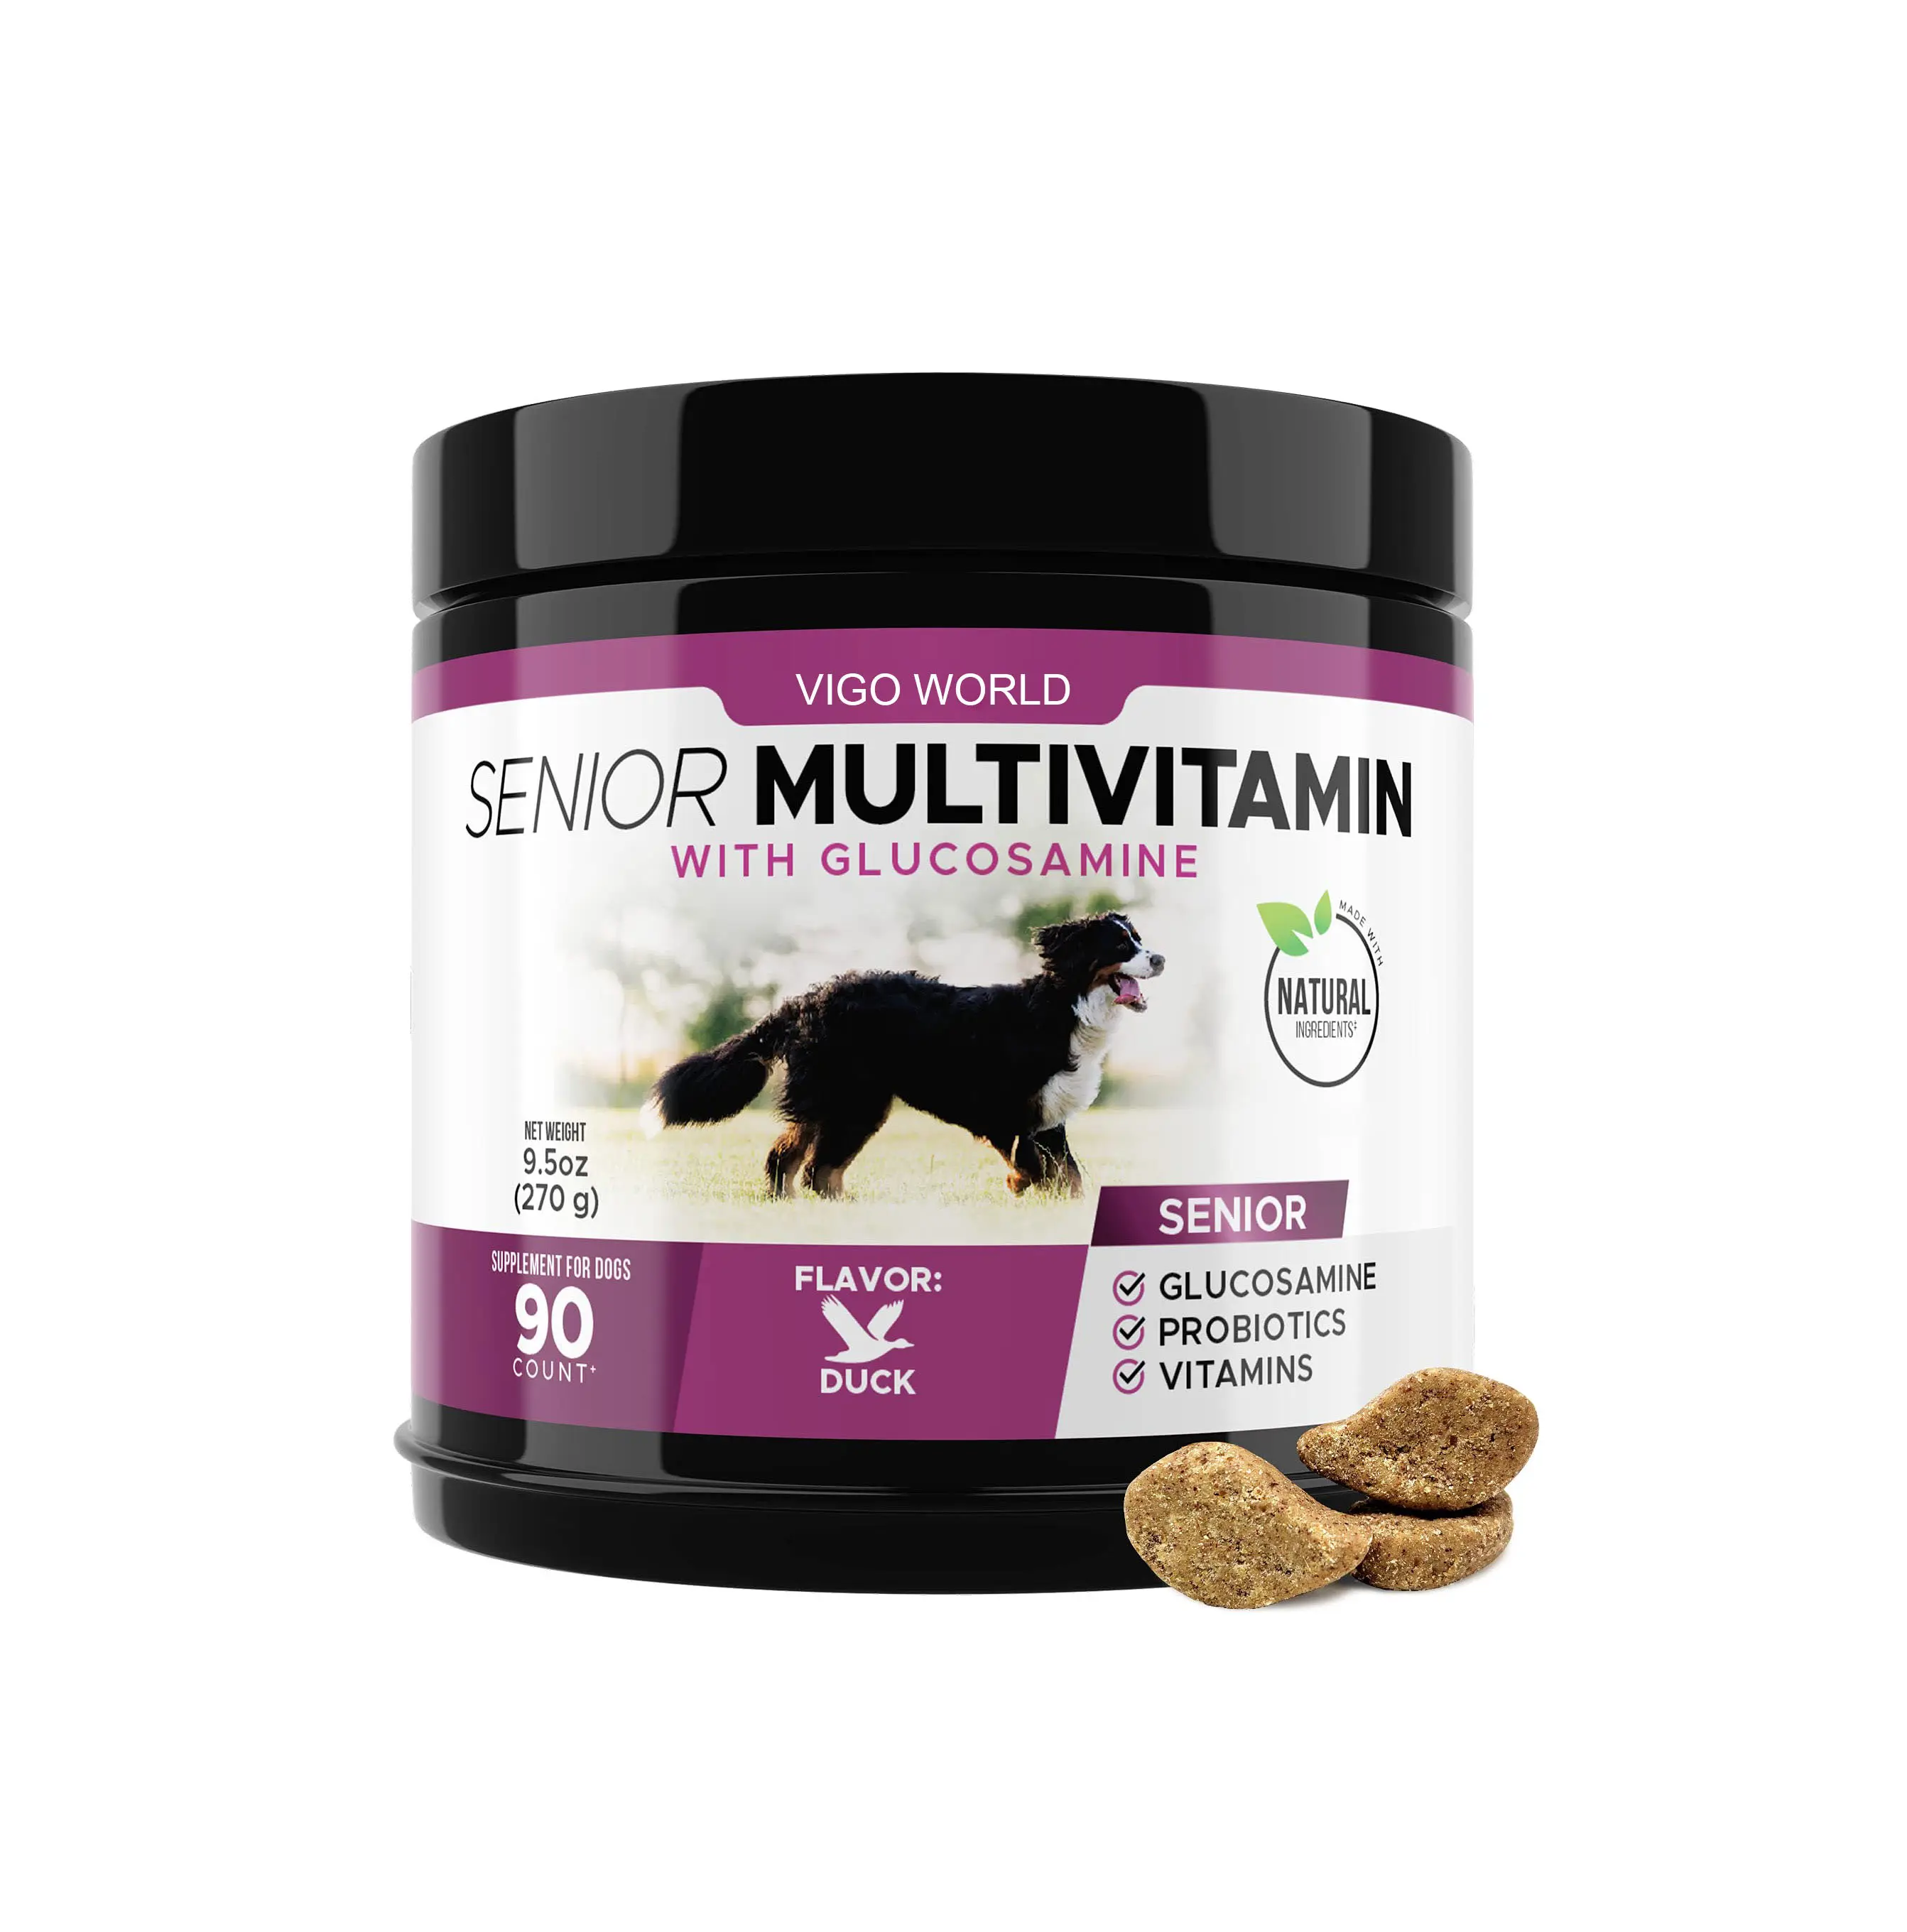 Natural Dogs Glucosamine Chondroitin & Probiotics Chews Support Digestion and Skin & Joint Health for Pet